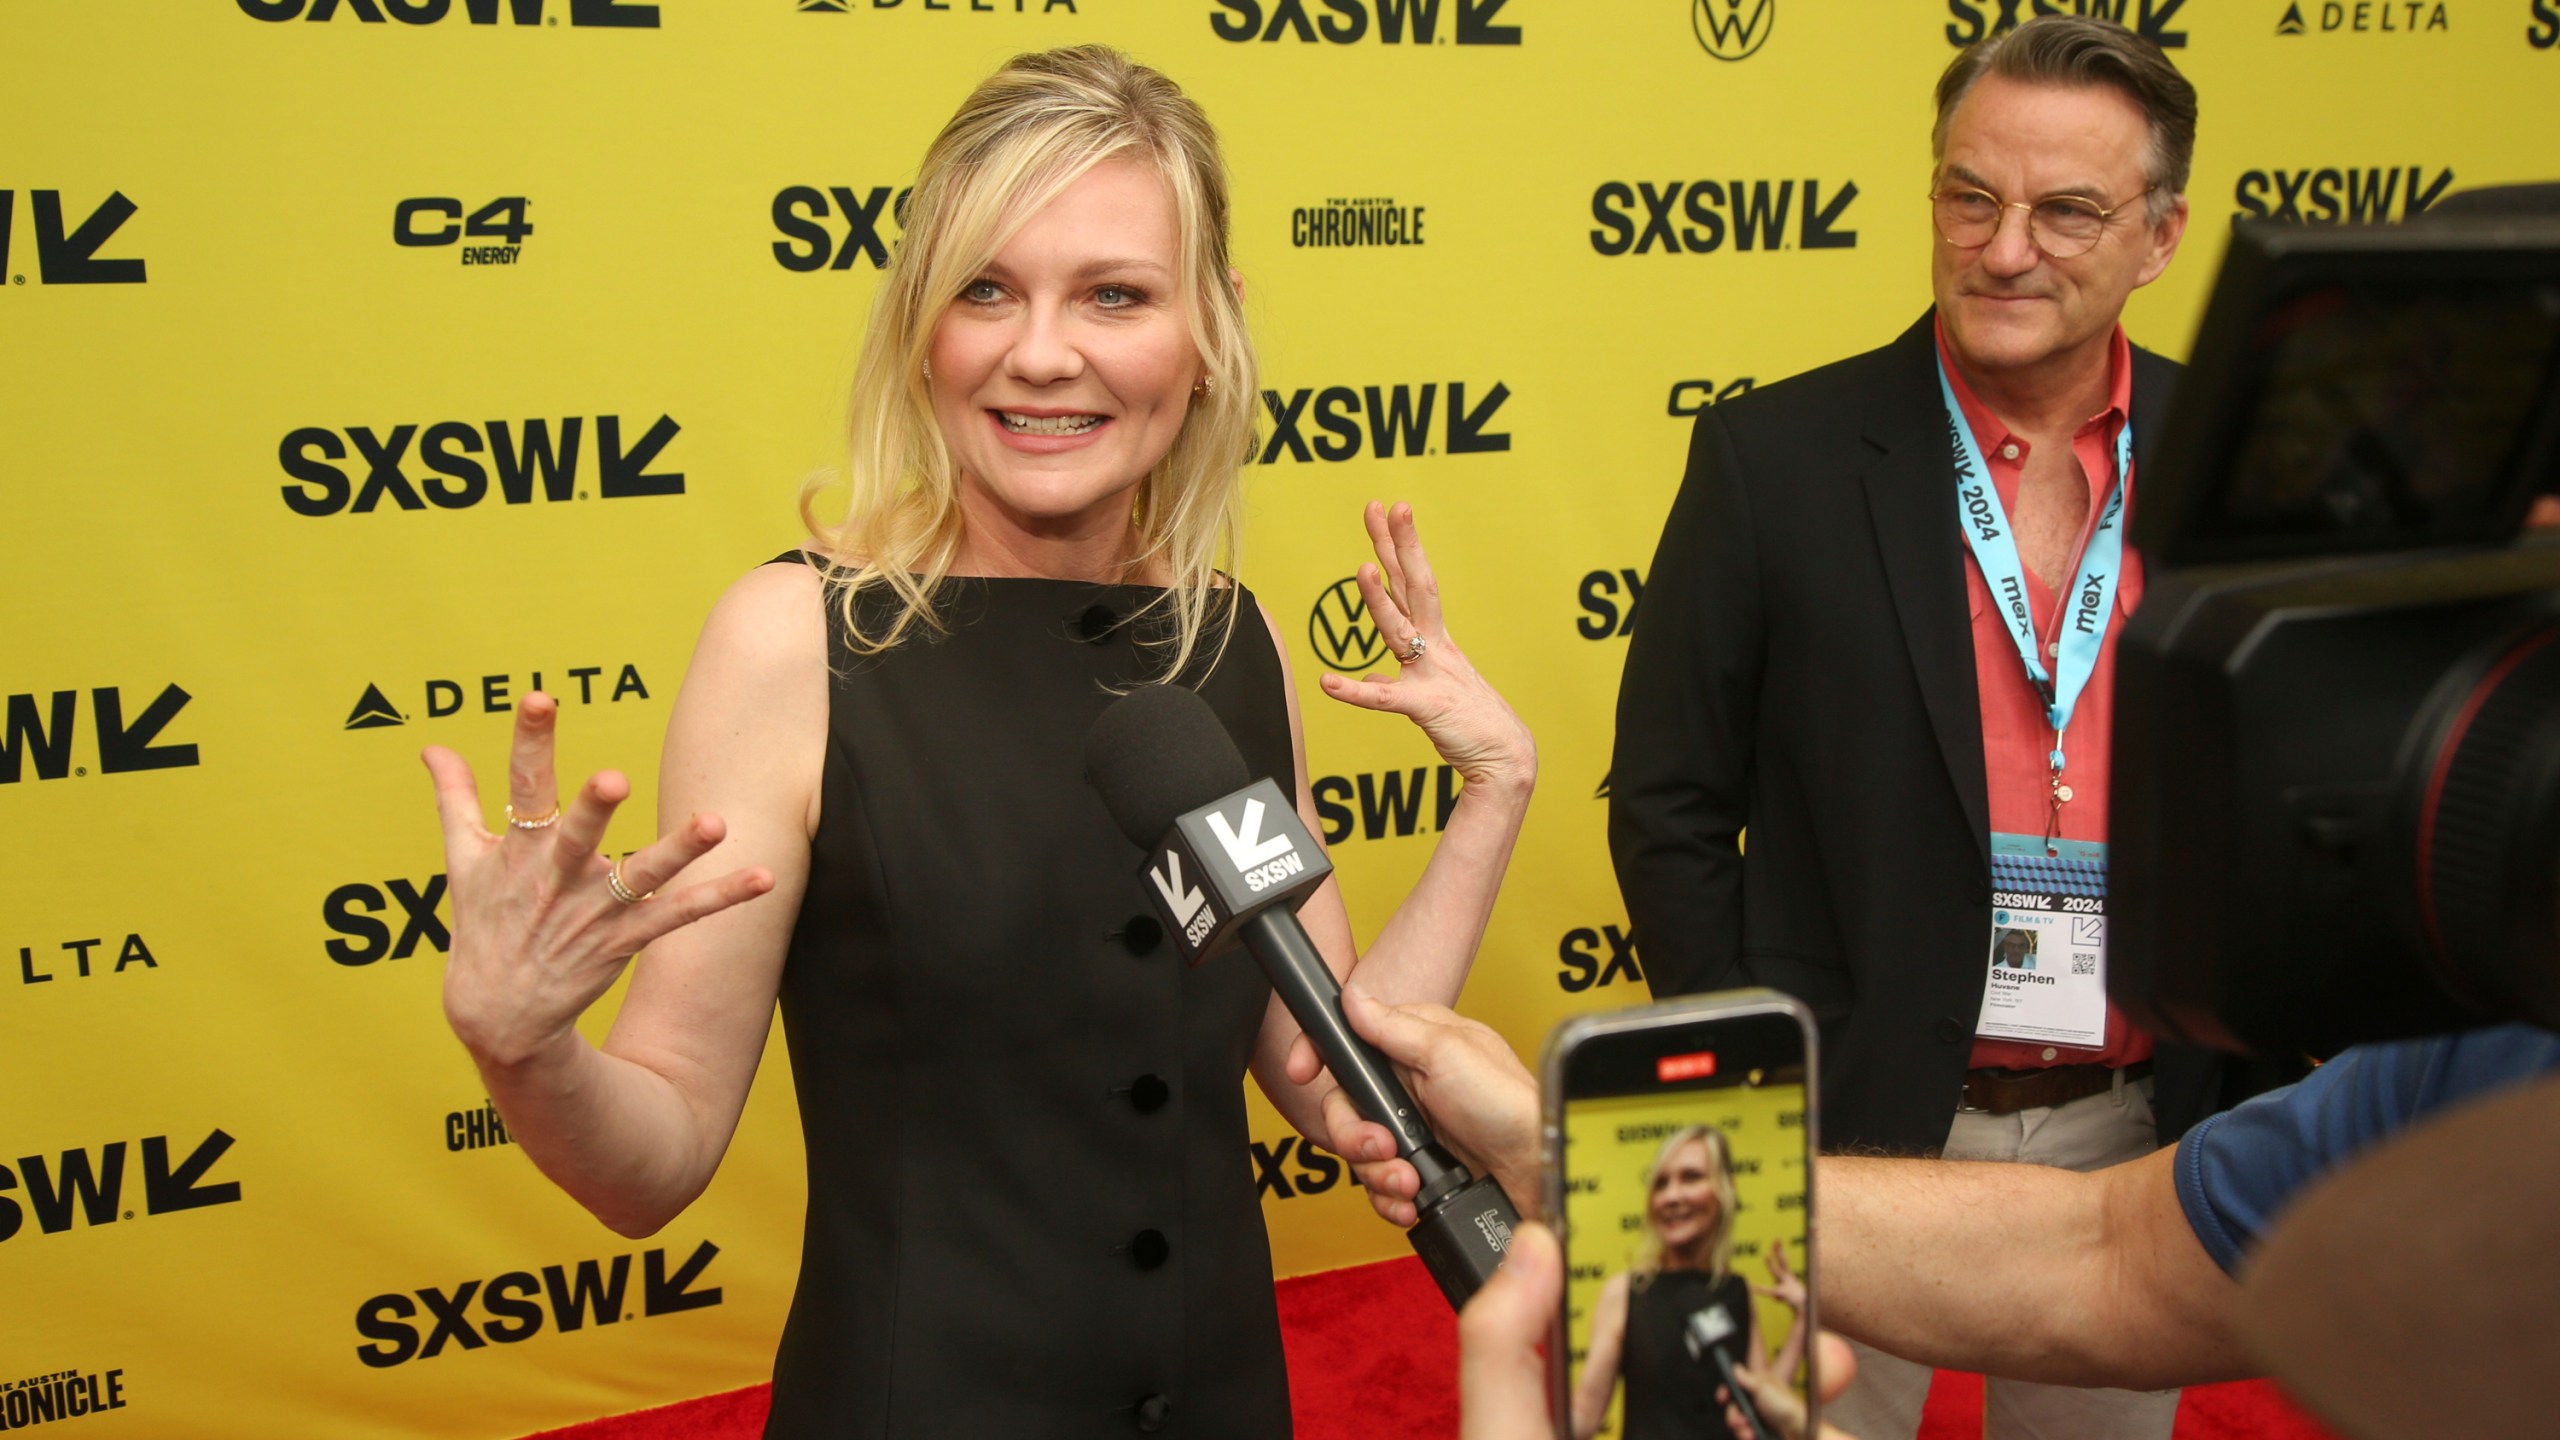 Kirsten Dunst arrives for the world premiere of "Civil War," at the Paramount Theatre during the South by Southwest Film Festival, Thursday, March 14, 2024, in Austin, Texas. (Photo by Jack Plunkett/Invision/AP)